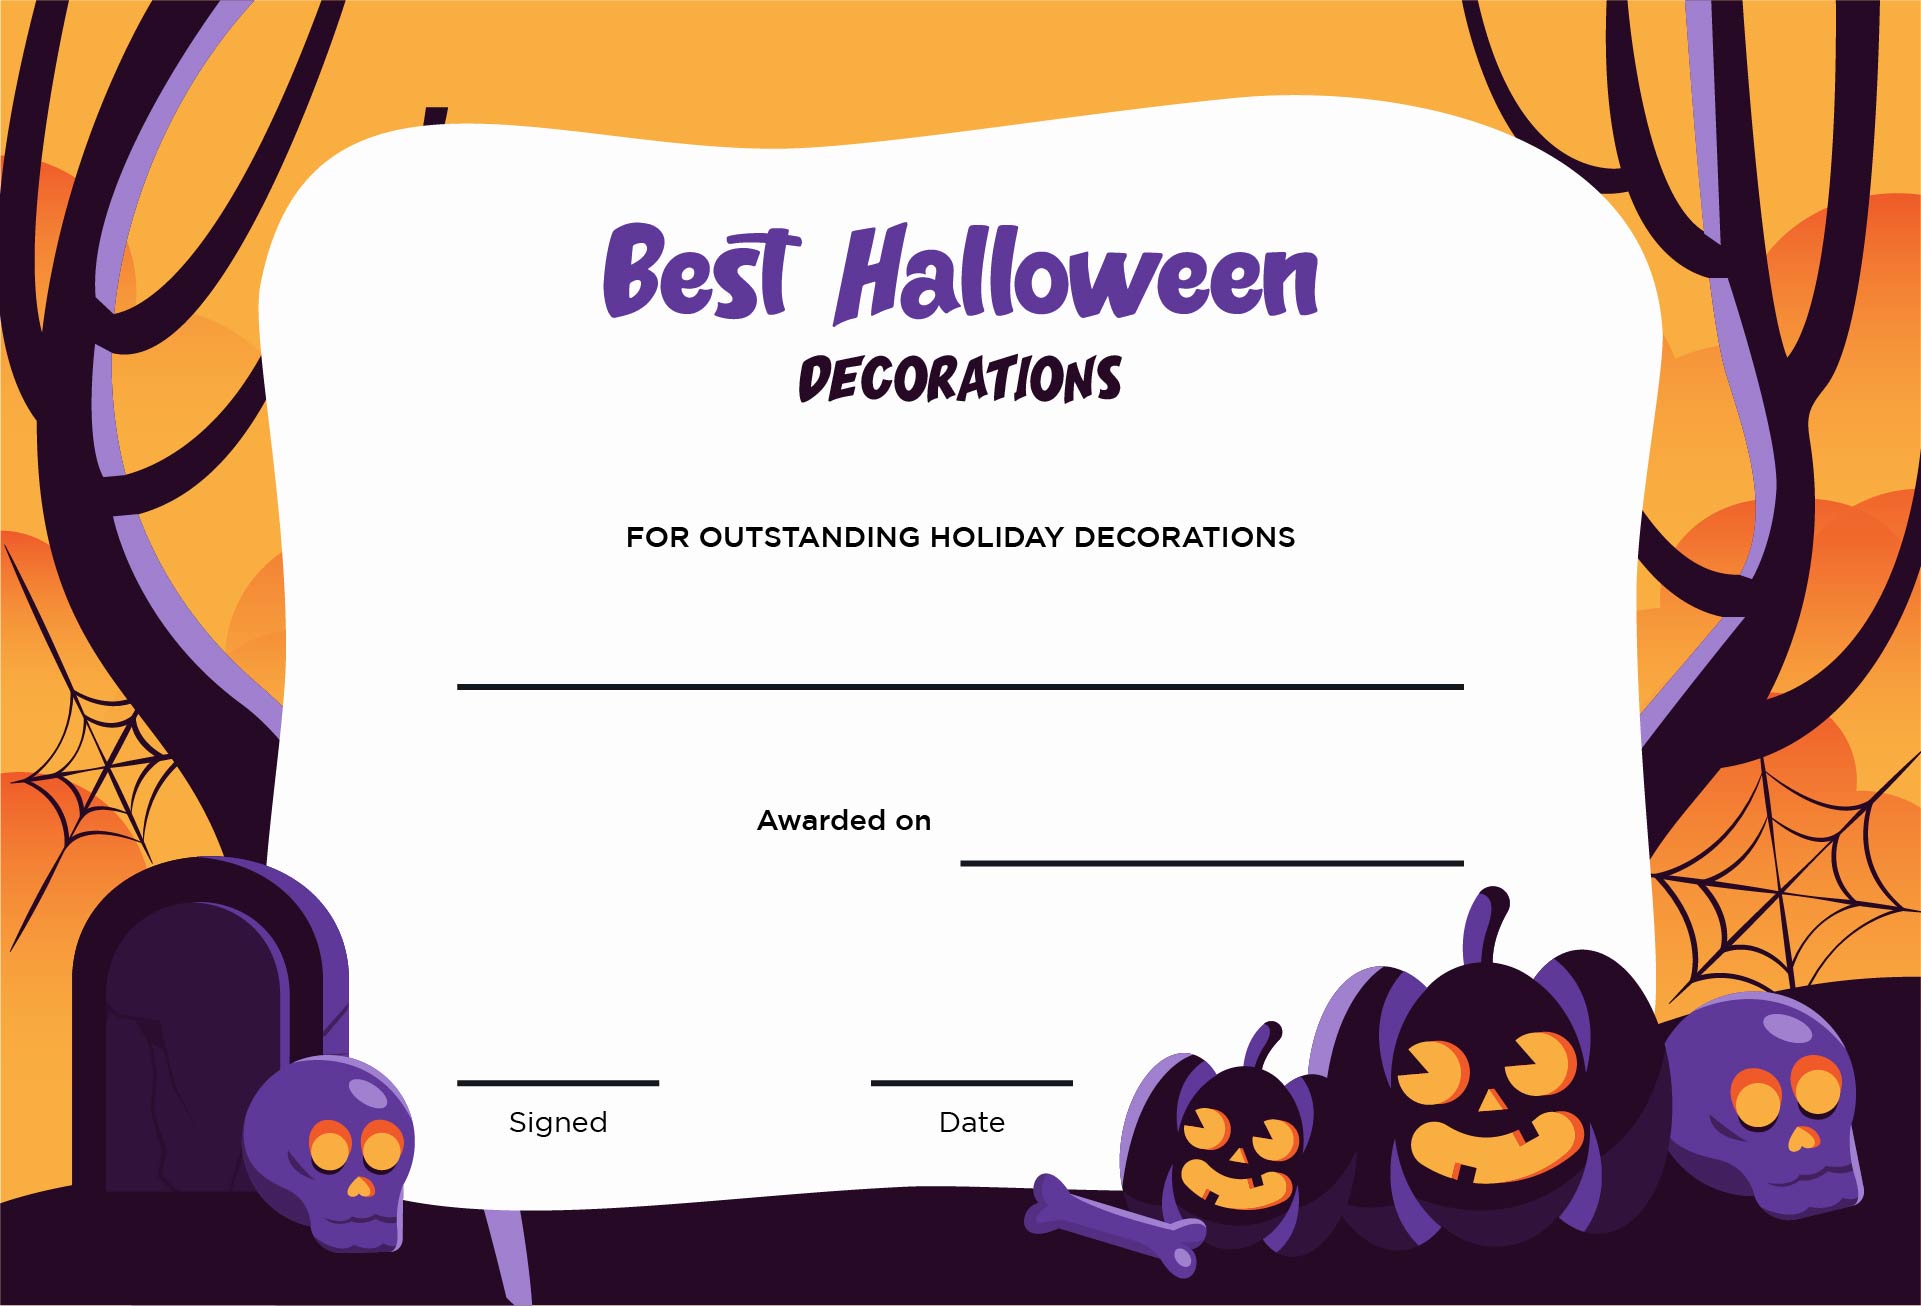 15 Best Halloween Costume Award Printable Certificates PDF for Free at ...